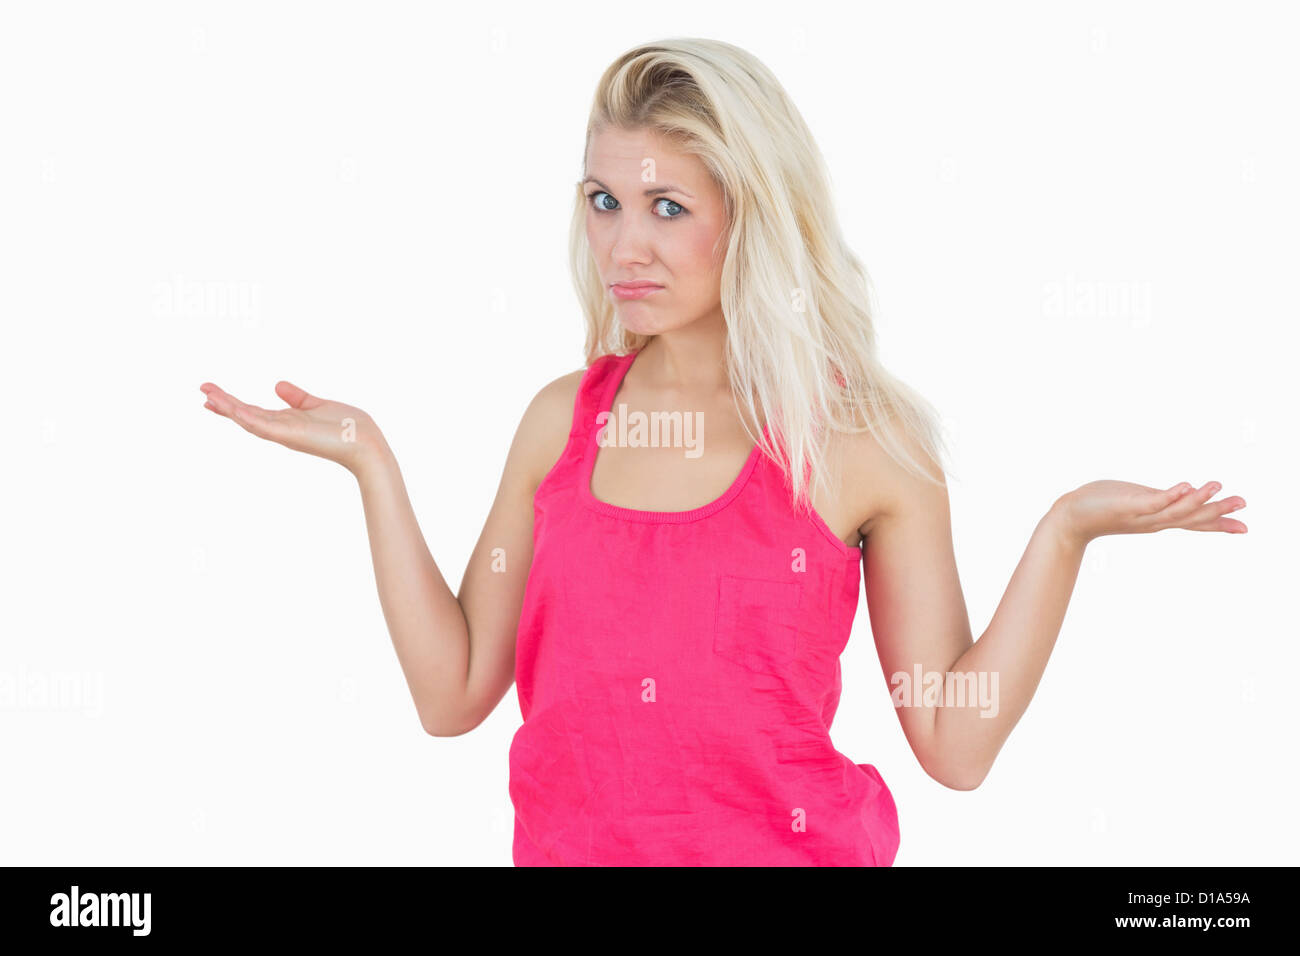 Beautiful young woman gesturing do not know sign Stock Photo